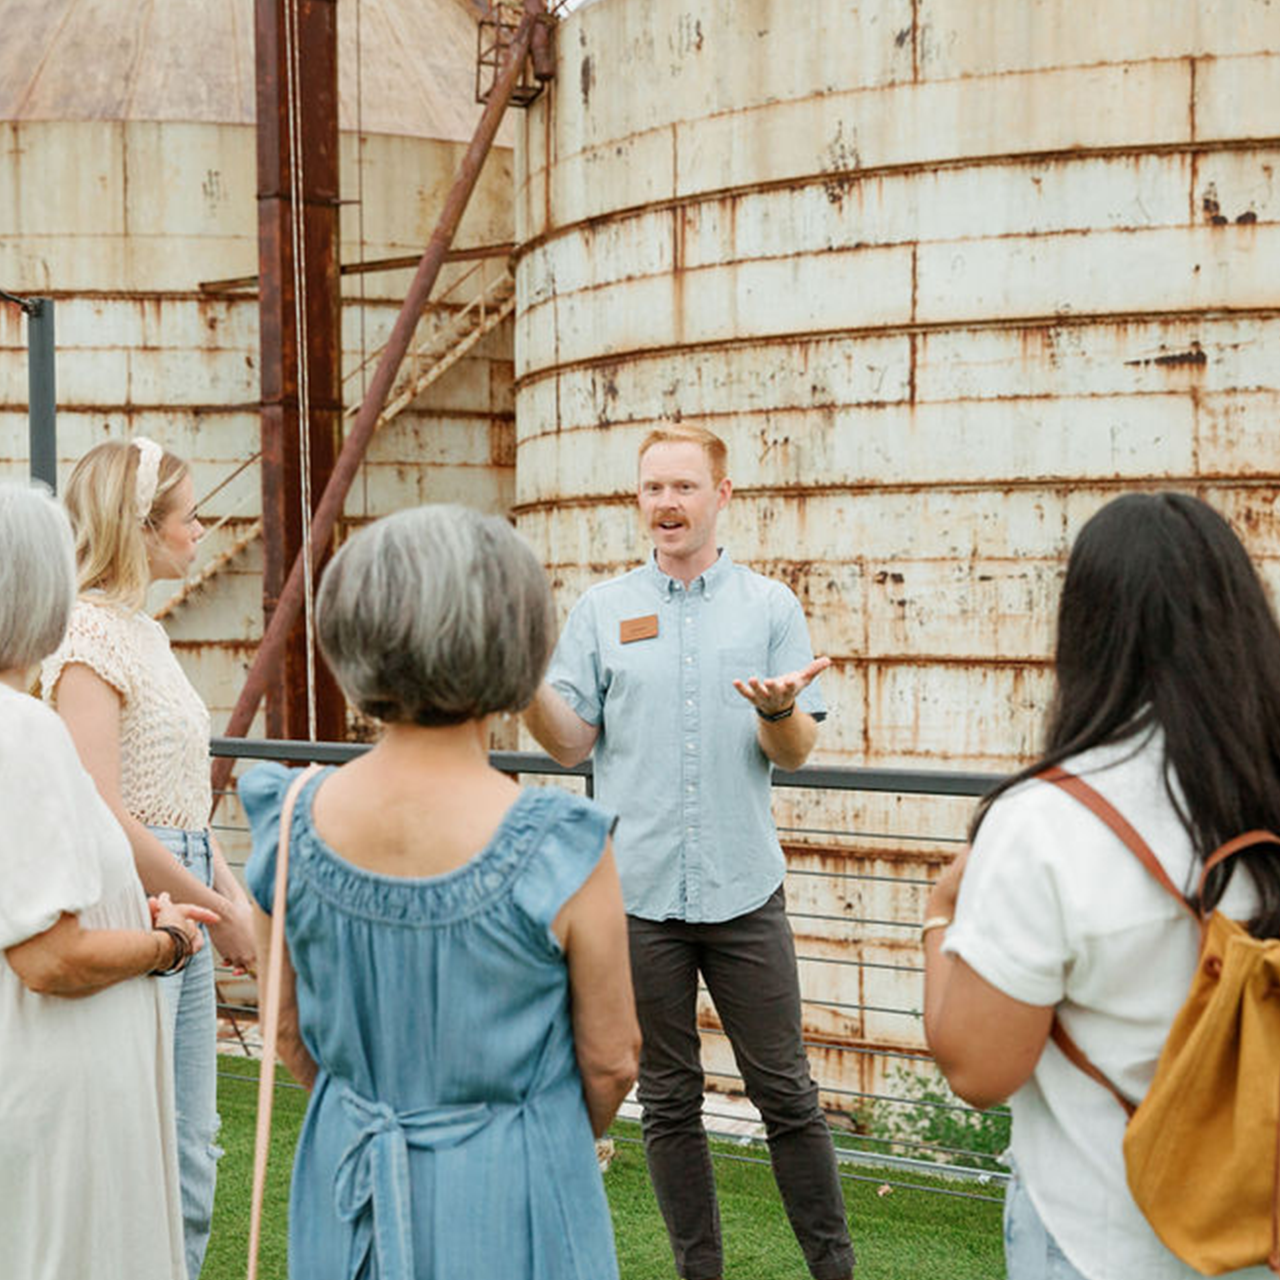 Group standing on rooftop learning about the Silos.